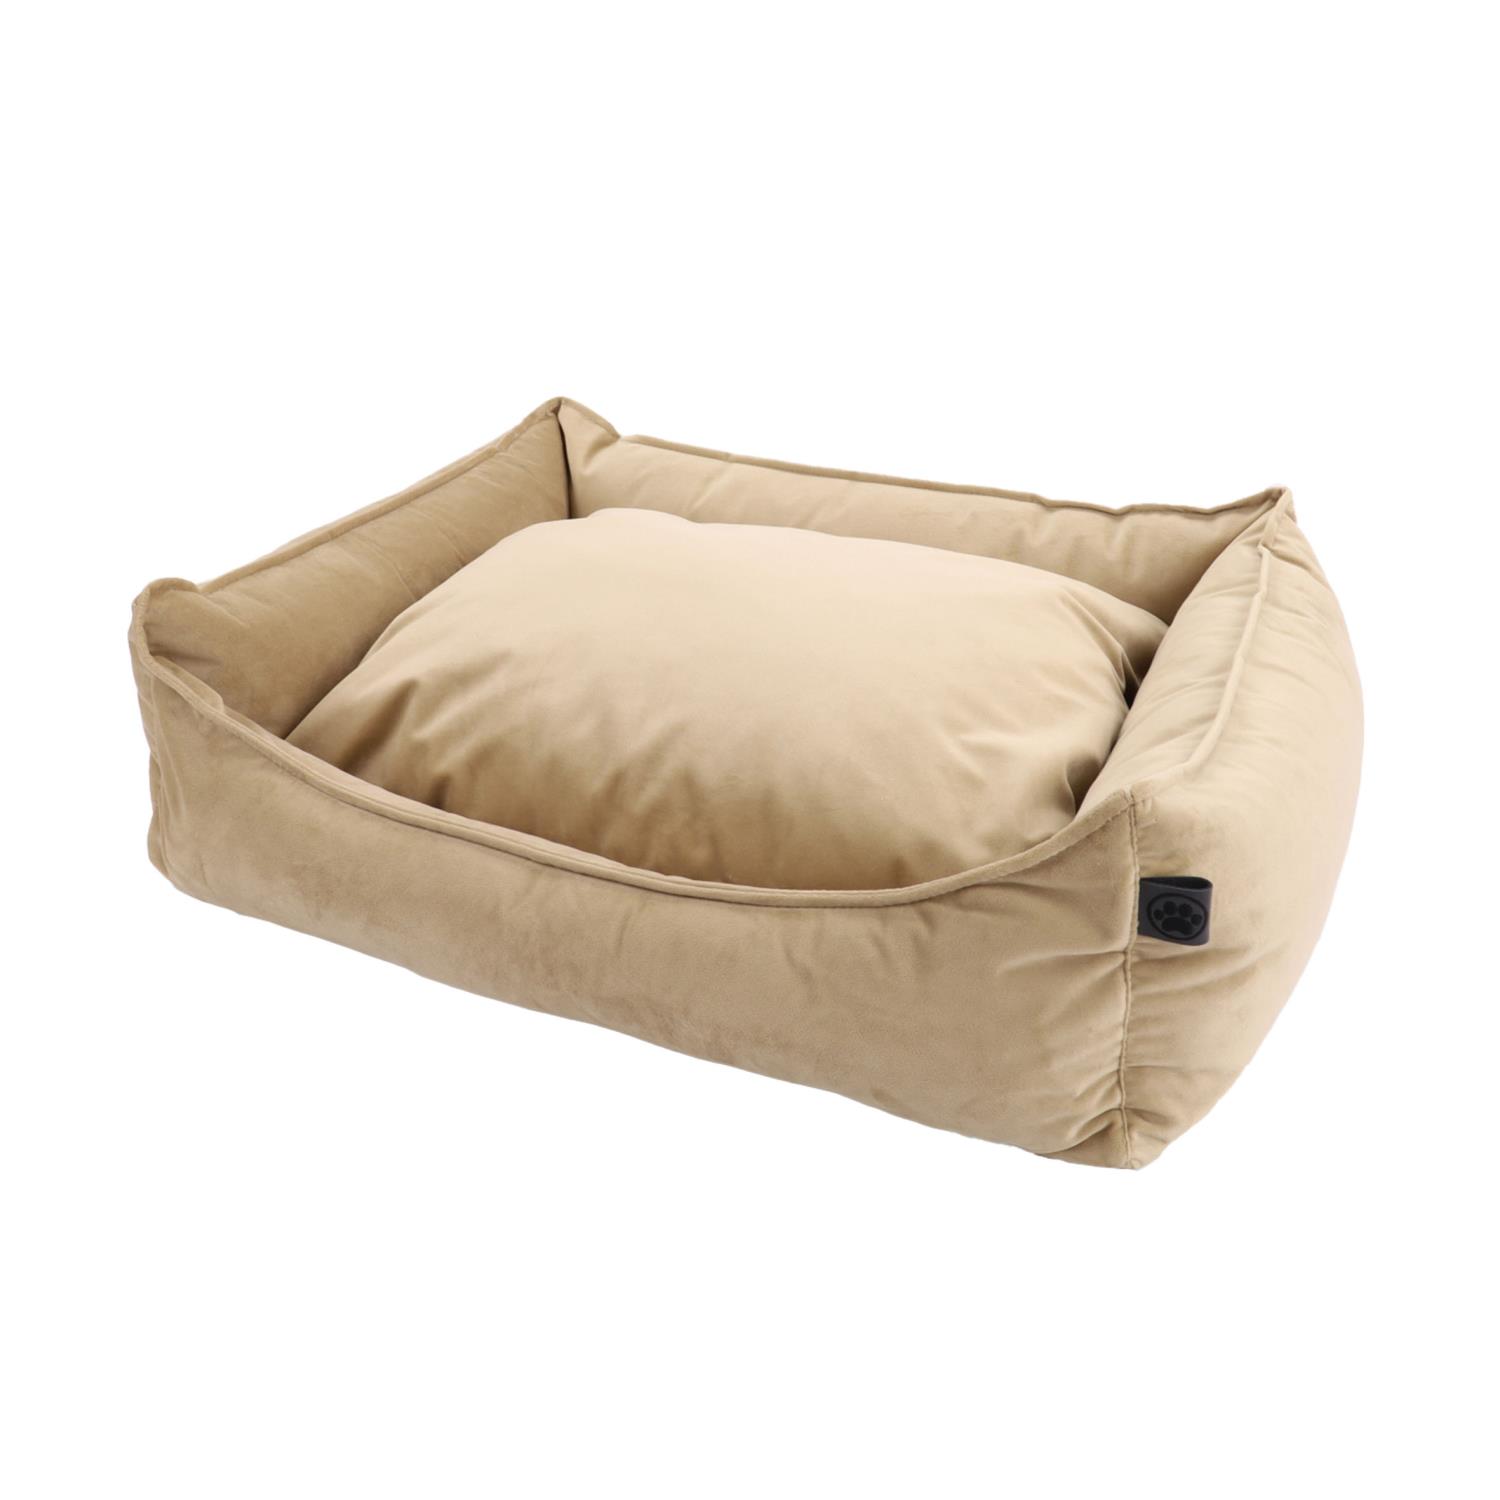 OS Dog Cocoon Velours Revers Pillow.70/60/20 04-Beige